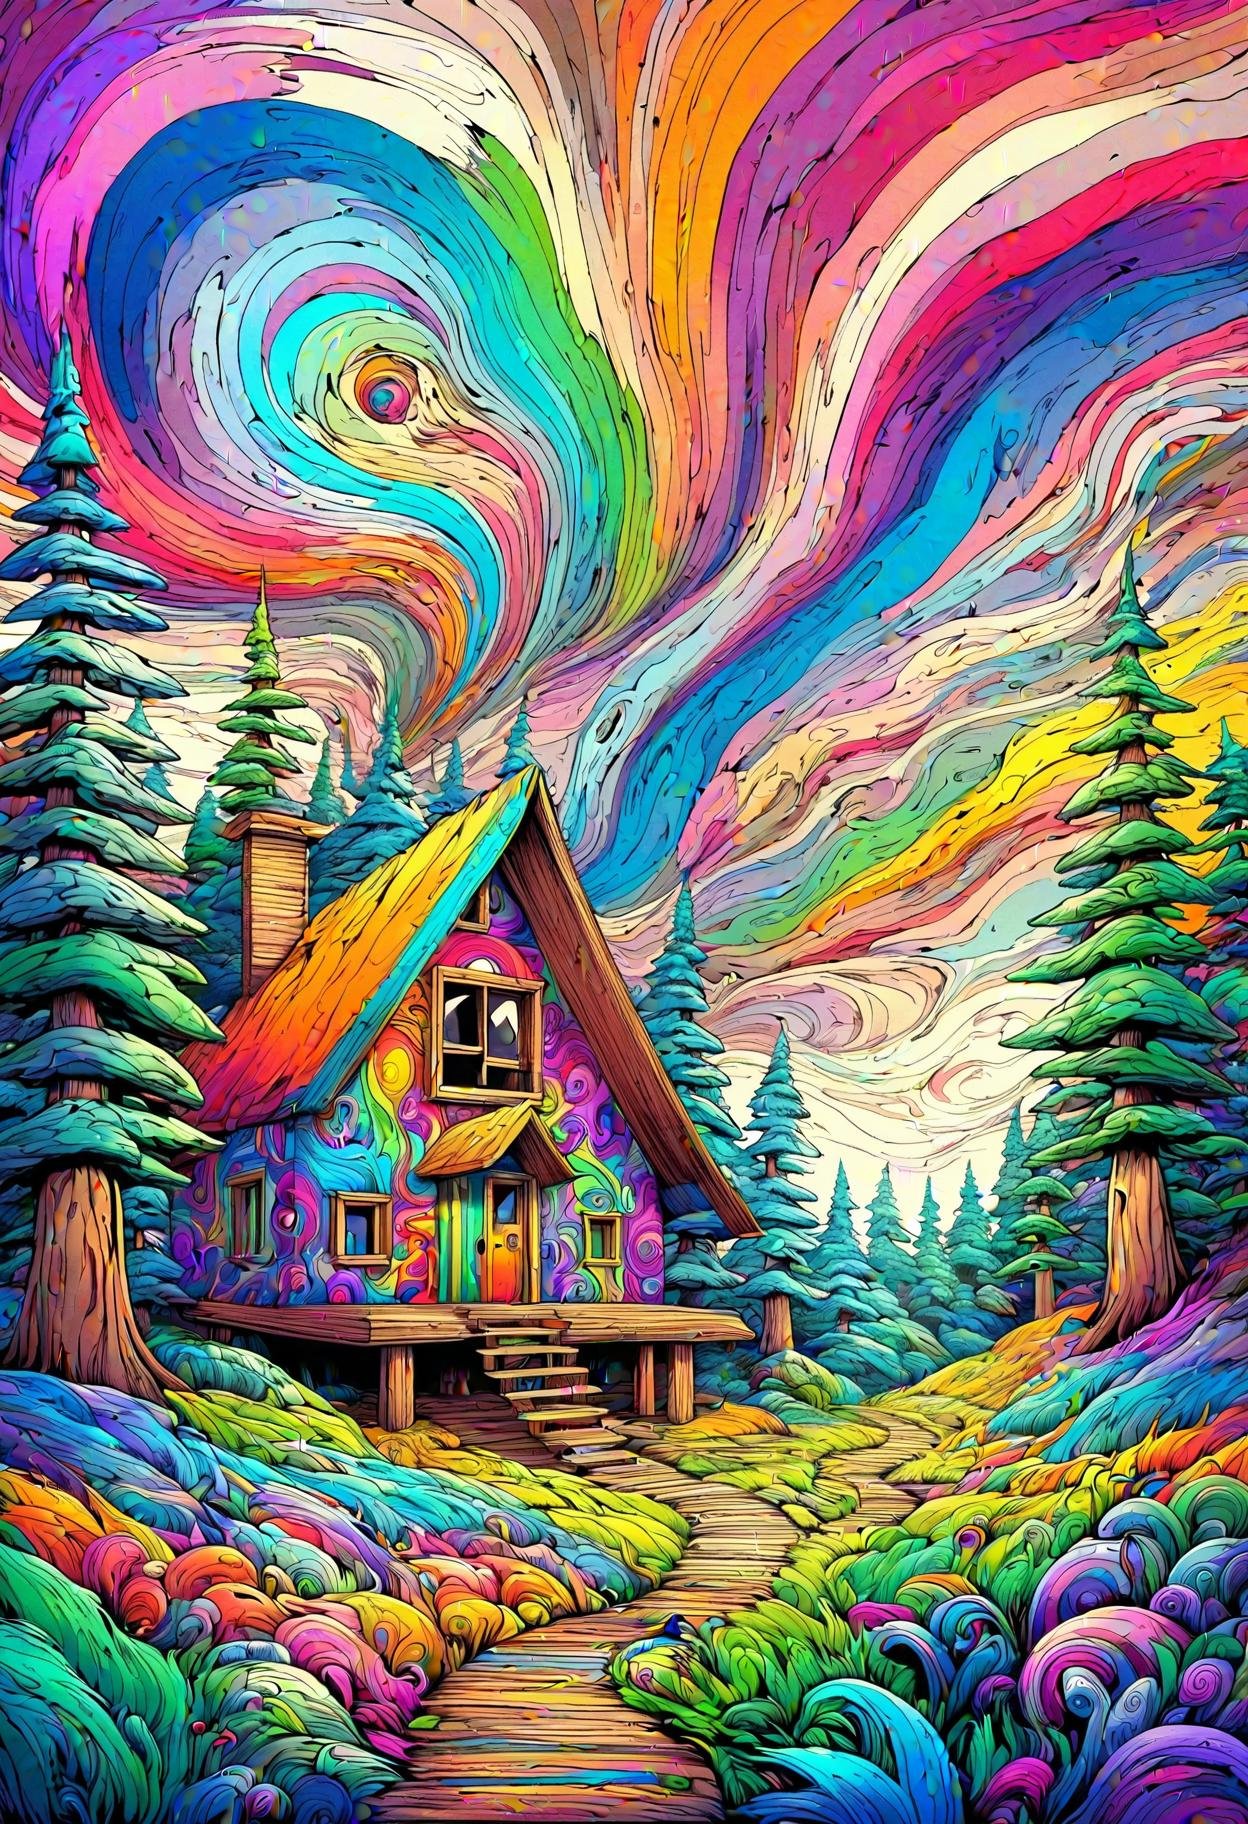 DonMM3l4nch0l1cP5ych0XL,vibrant, psychodelic, forest home in tundra biome,  <lora:DonMM3l4nch0l1cP5ych0XL-000004:0.8>